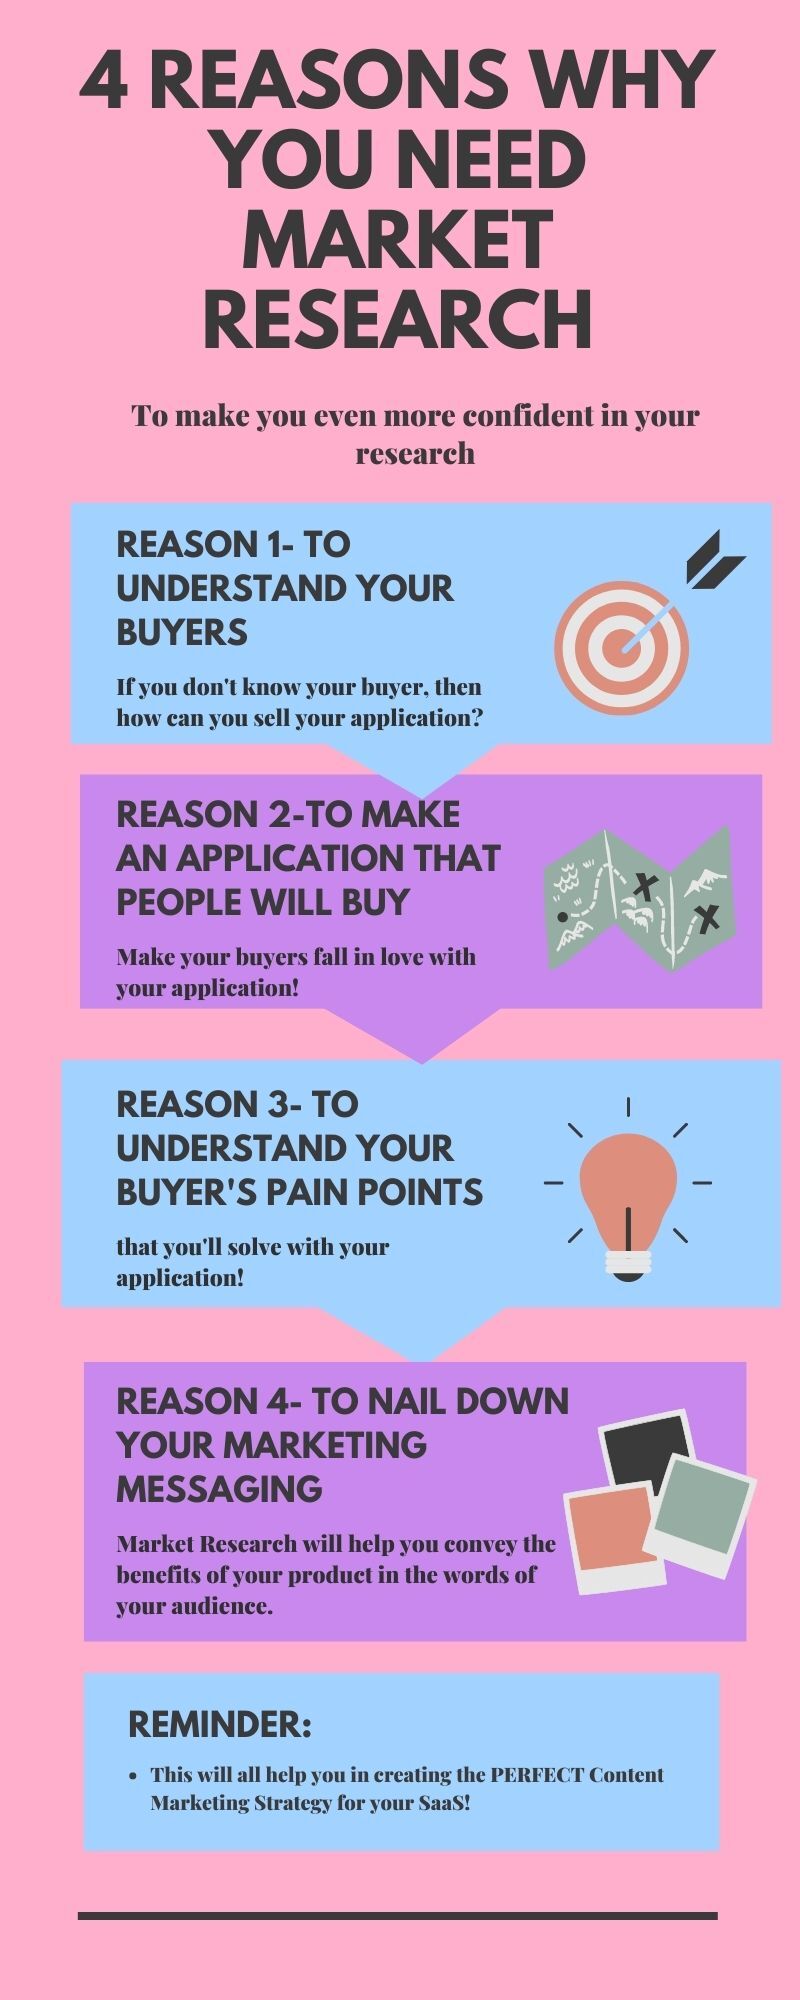 4 reasons why you need market research infographic